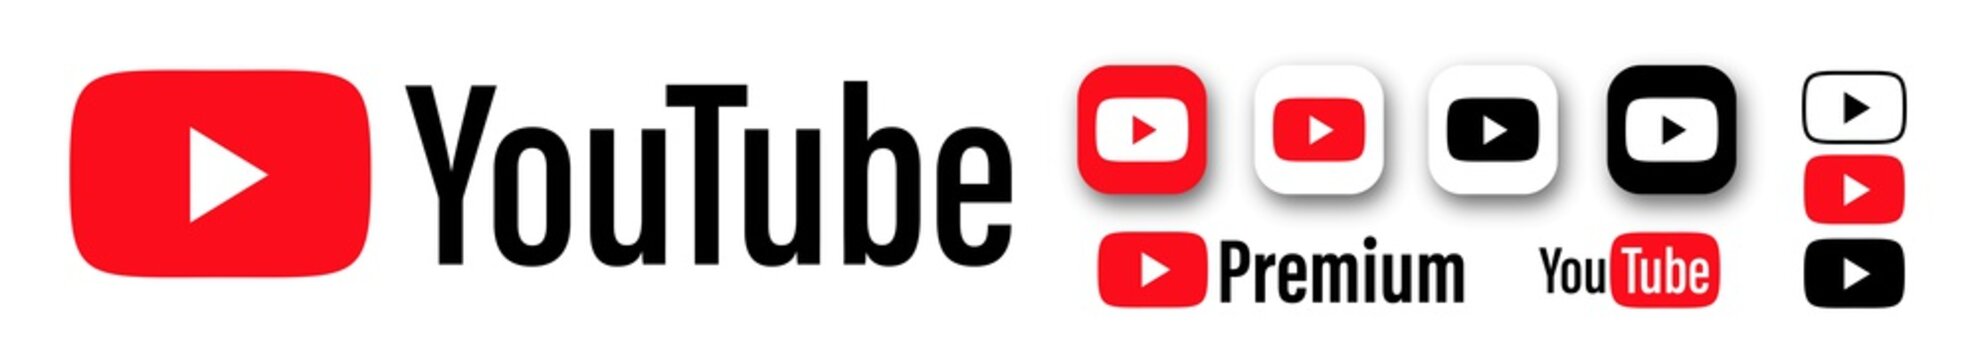 Youtube Logo Icon Play Button. Video Social Media App Symbol Isolated You Tube On White Background